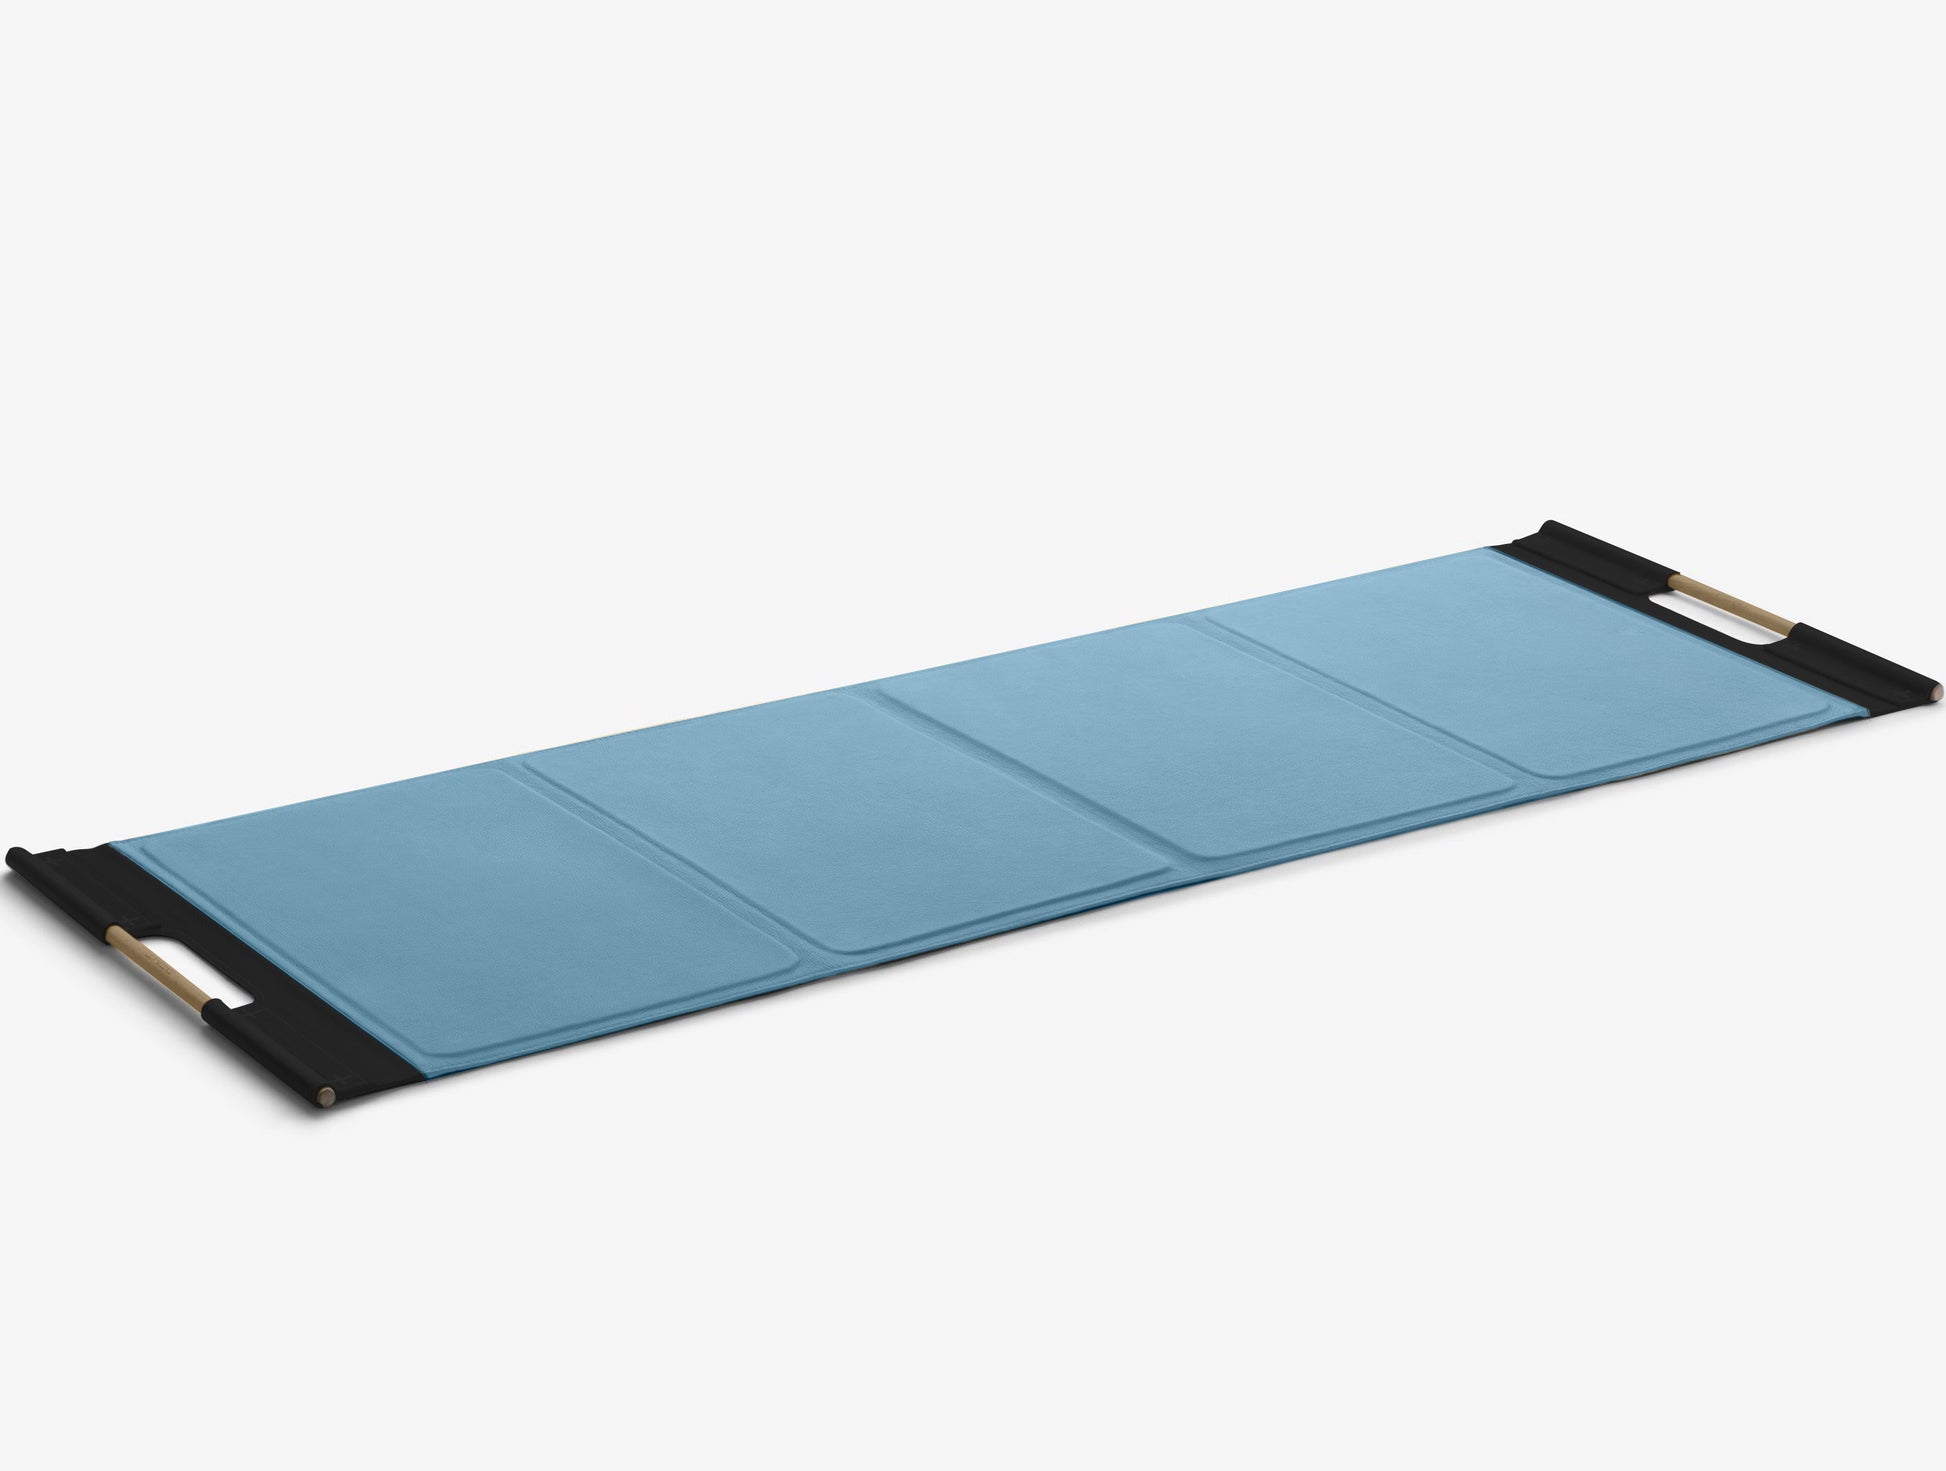 PENT MATA. Cycling Bears. Luxury Yoga Mat. Bespoke Exercise Mat. Exquisite customisable mats for stretching in Singapore